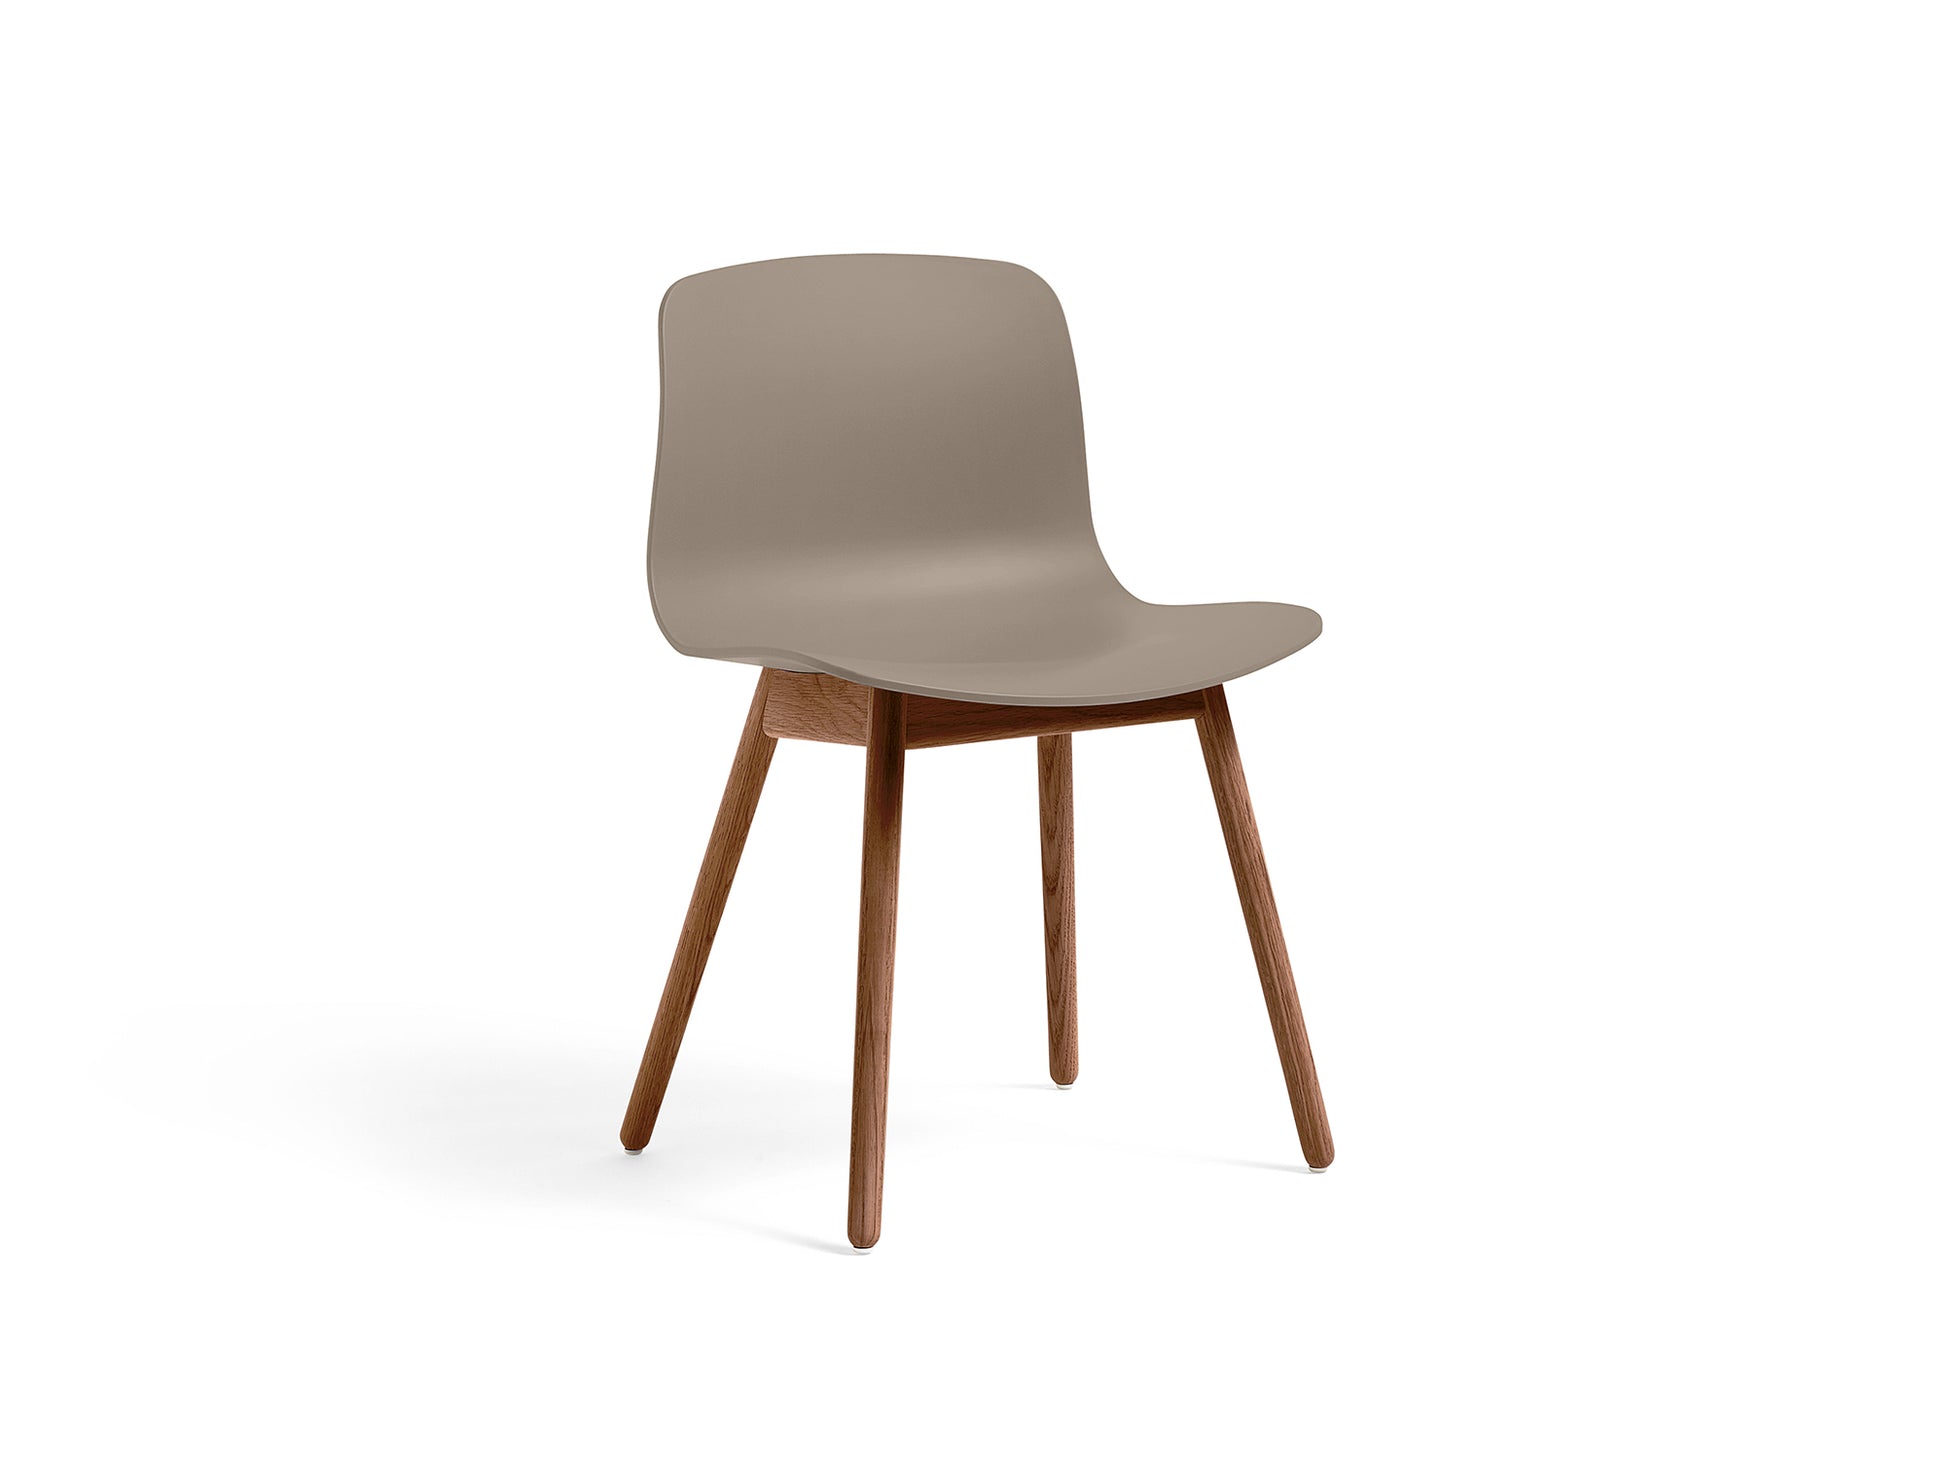 About A Chair AAC 12 by HAY - Khaki 2.0 Shell / Lacquered Walnut Base